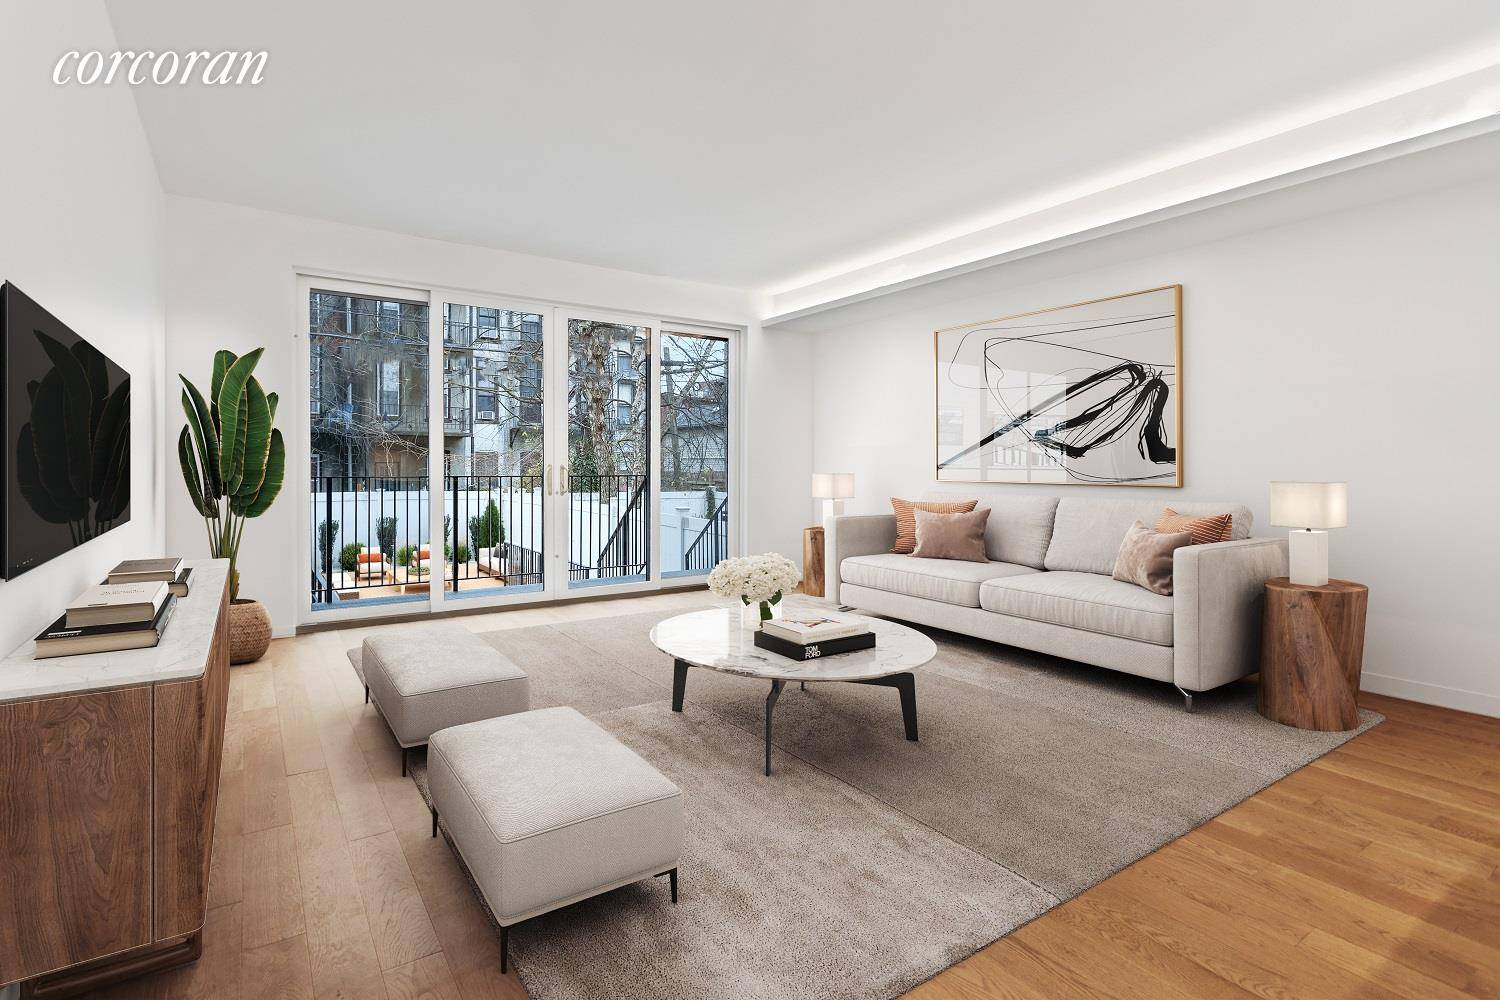 An exclusive new contemporary offering awaits in a sought after historic neighborhood, ideally located near the corner of 7th Avenue amp ; 12th Street in Park Slope !